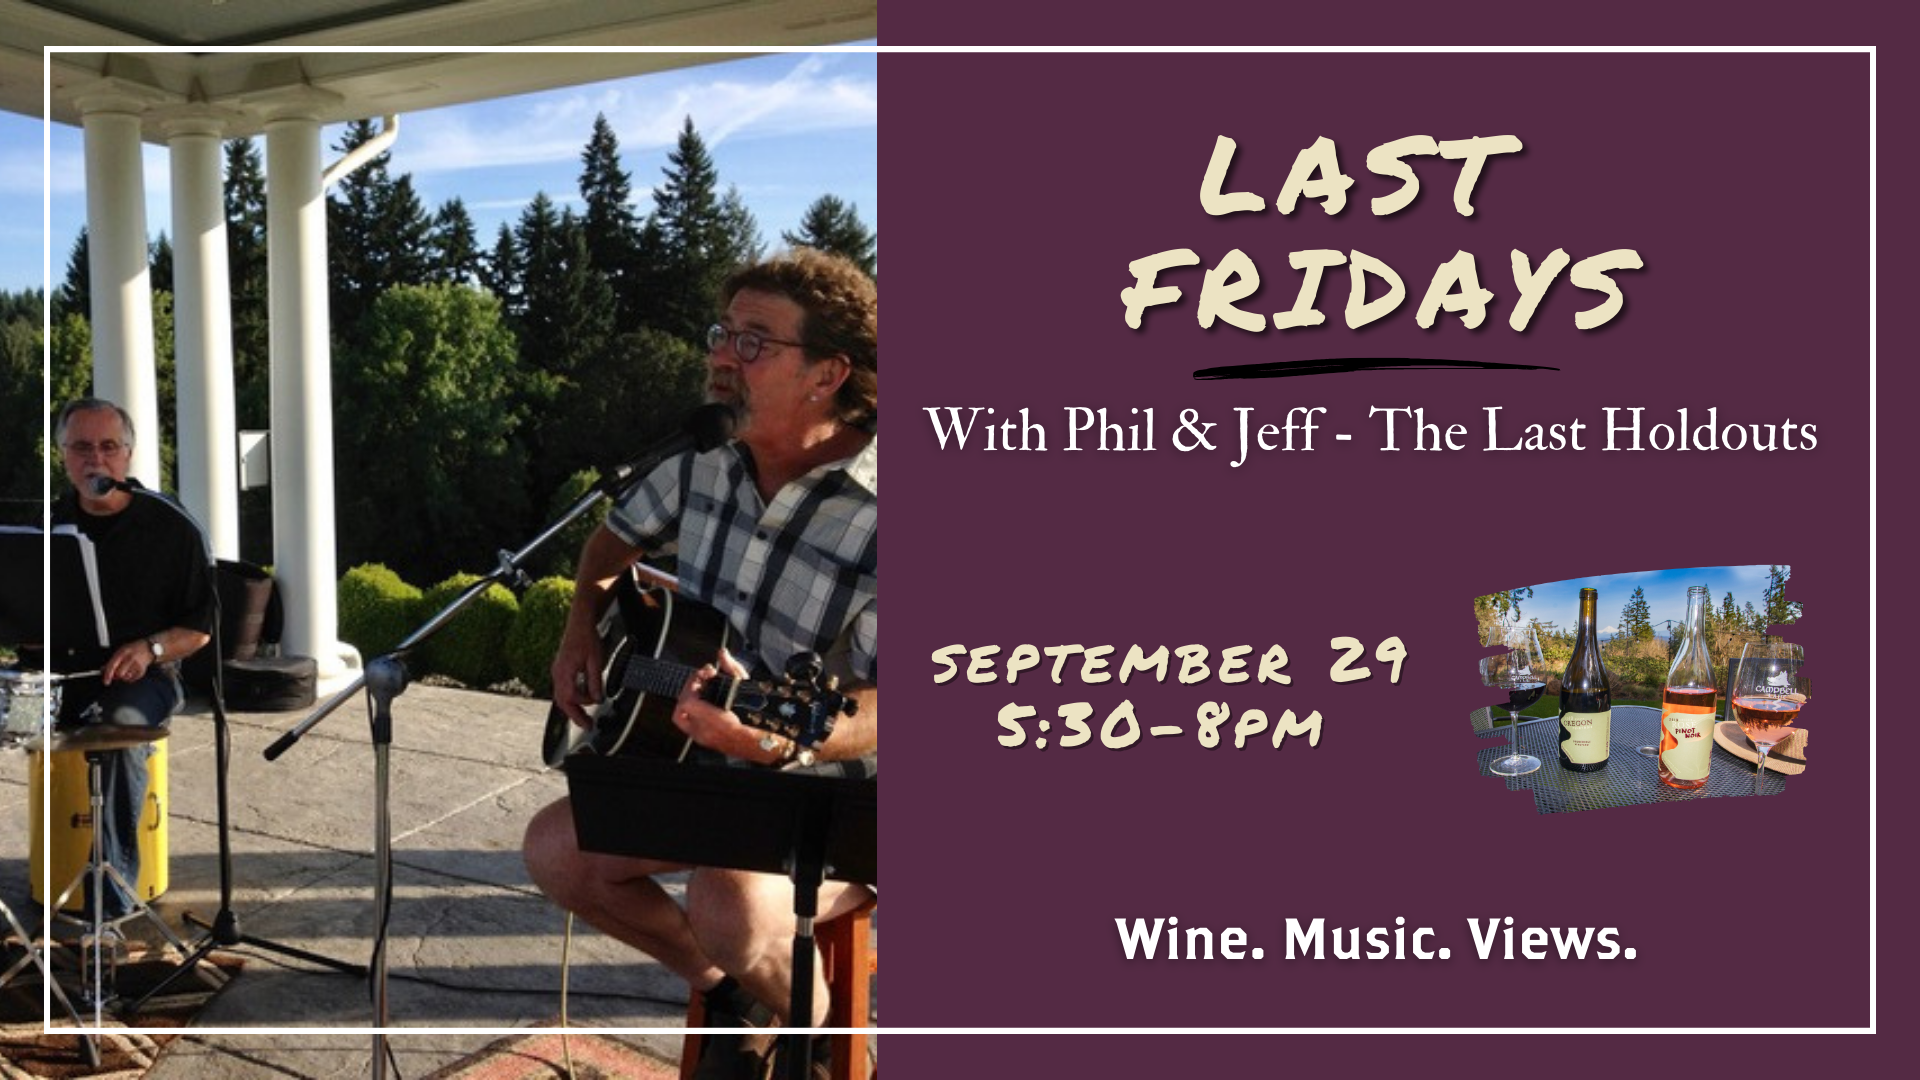 Last Fridays with Phil & Jeff – The Last Holdouts